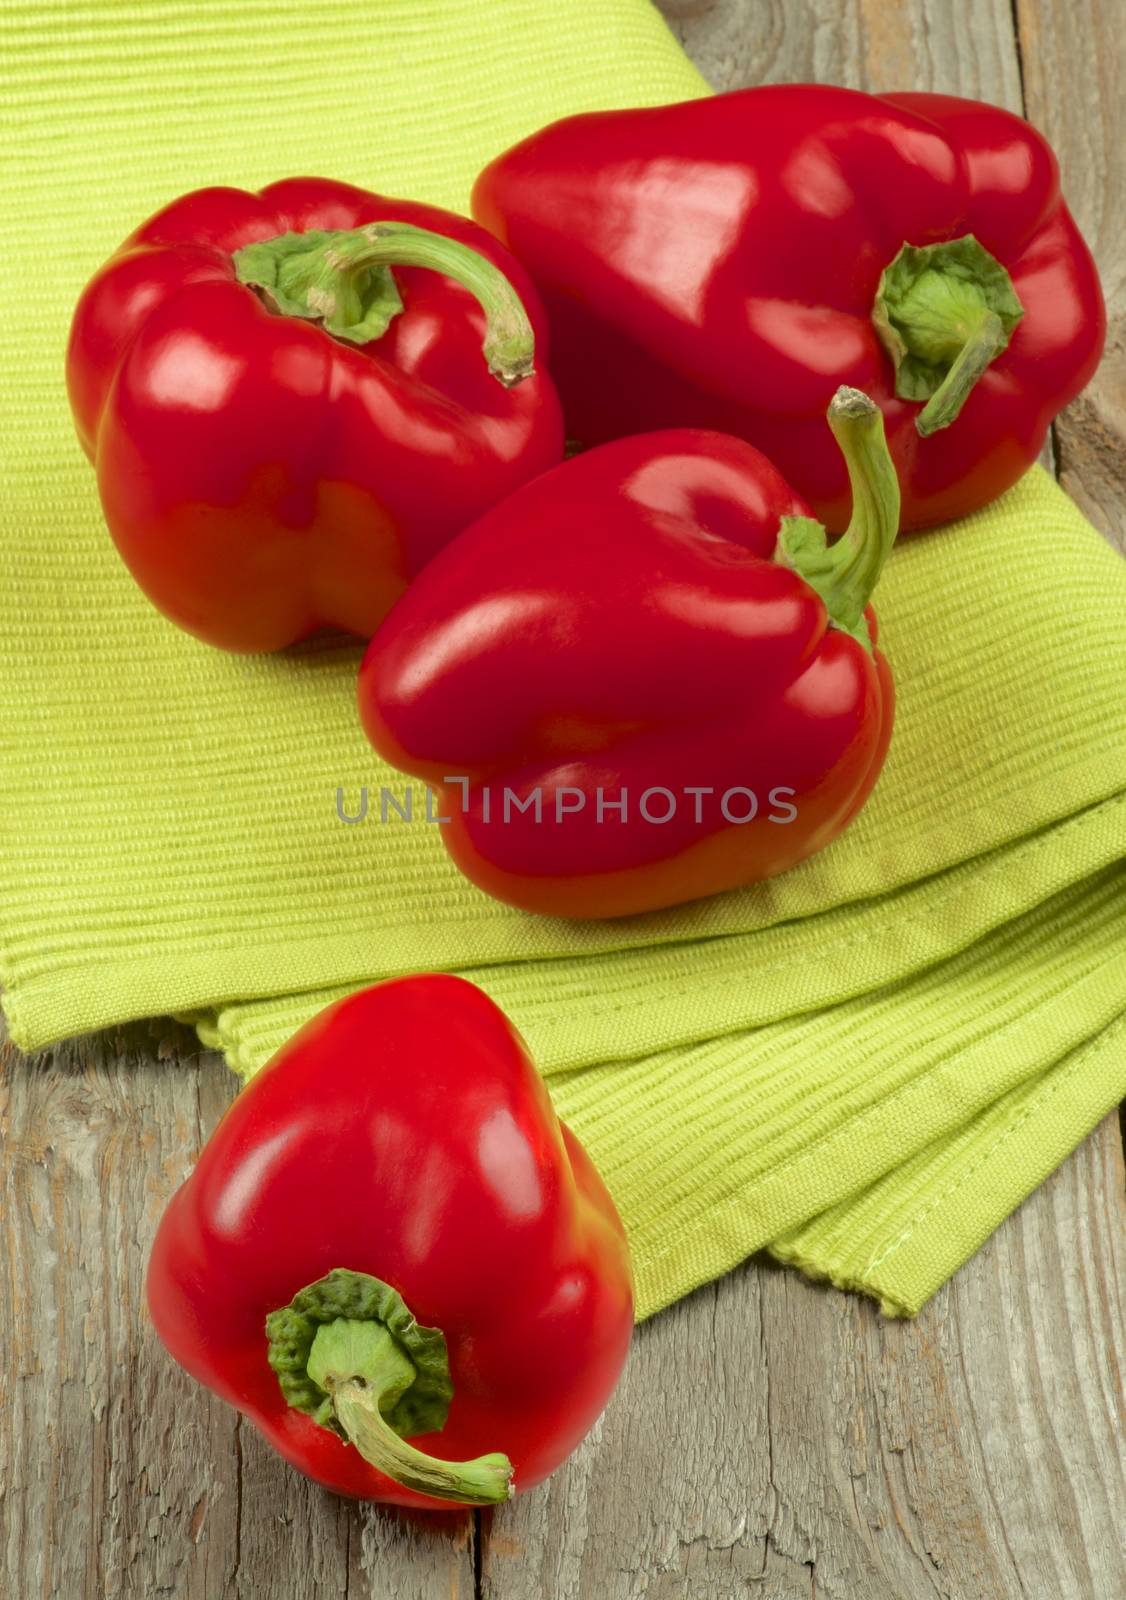 Red Bell Peppers by zhekos